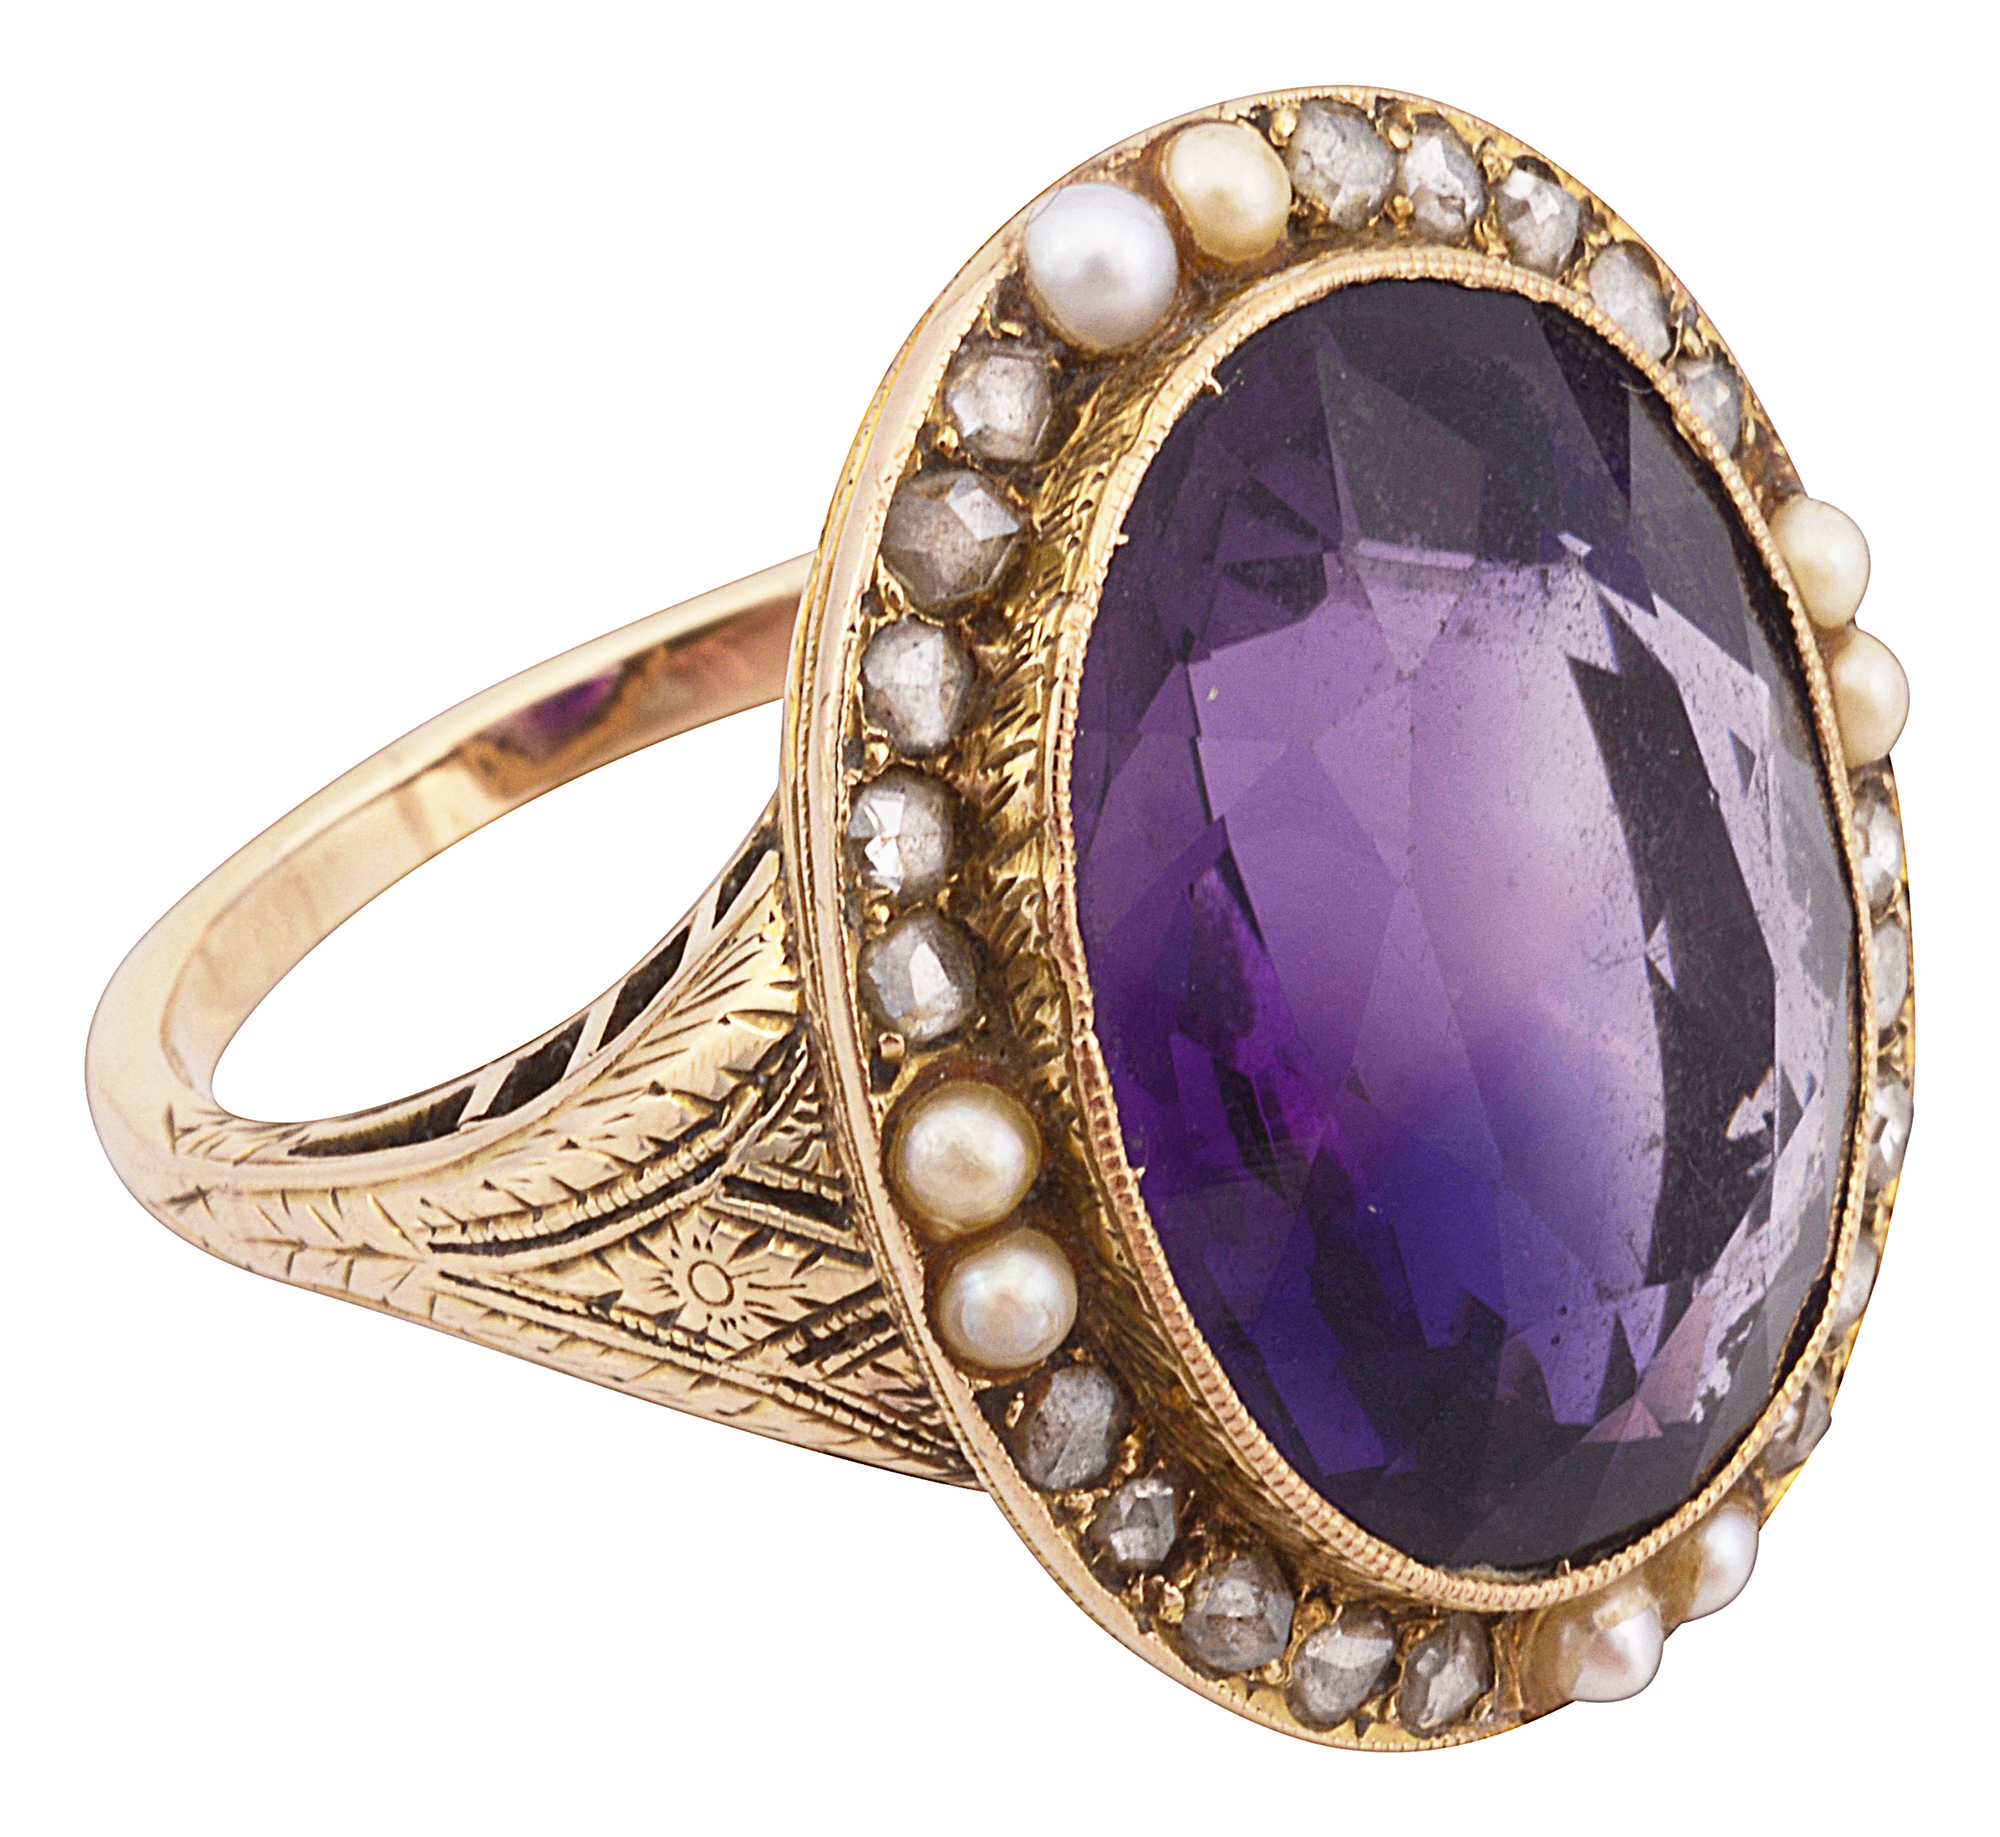 A mid Victorian amethyst, pearl and diamond-set ring